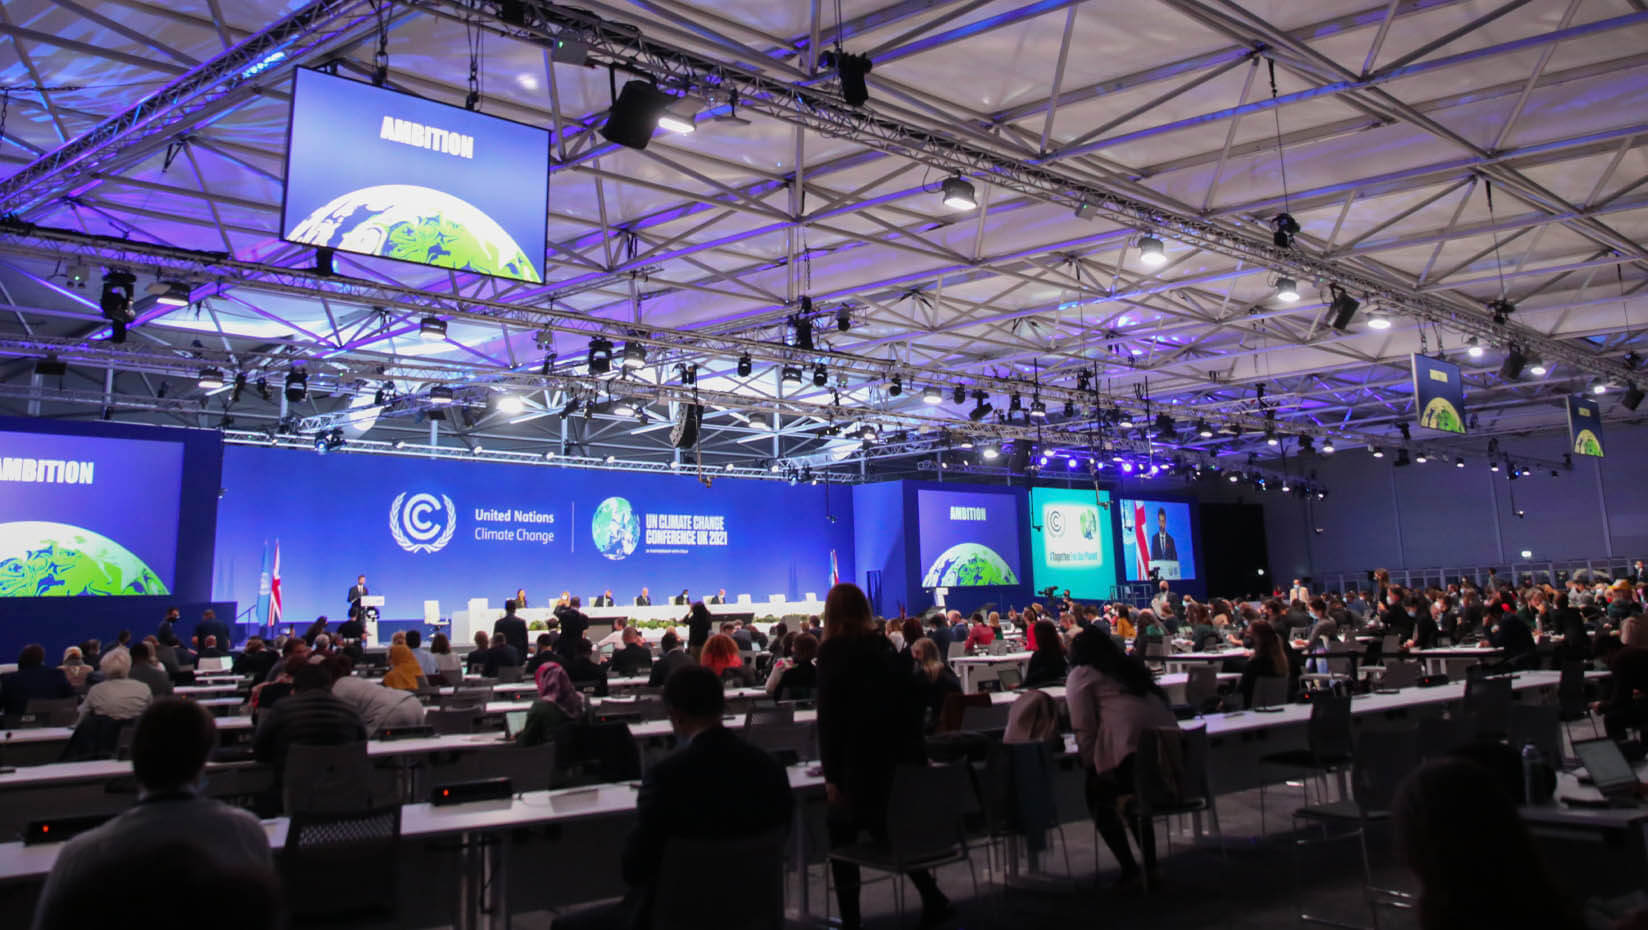 Photo of a crowd attending the United Nations Framework Convention on Climate Change (UNFCCC) 26th Conference of the Parties (COP26) in November 2021 in Glasgow, Scotland.